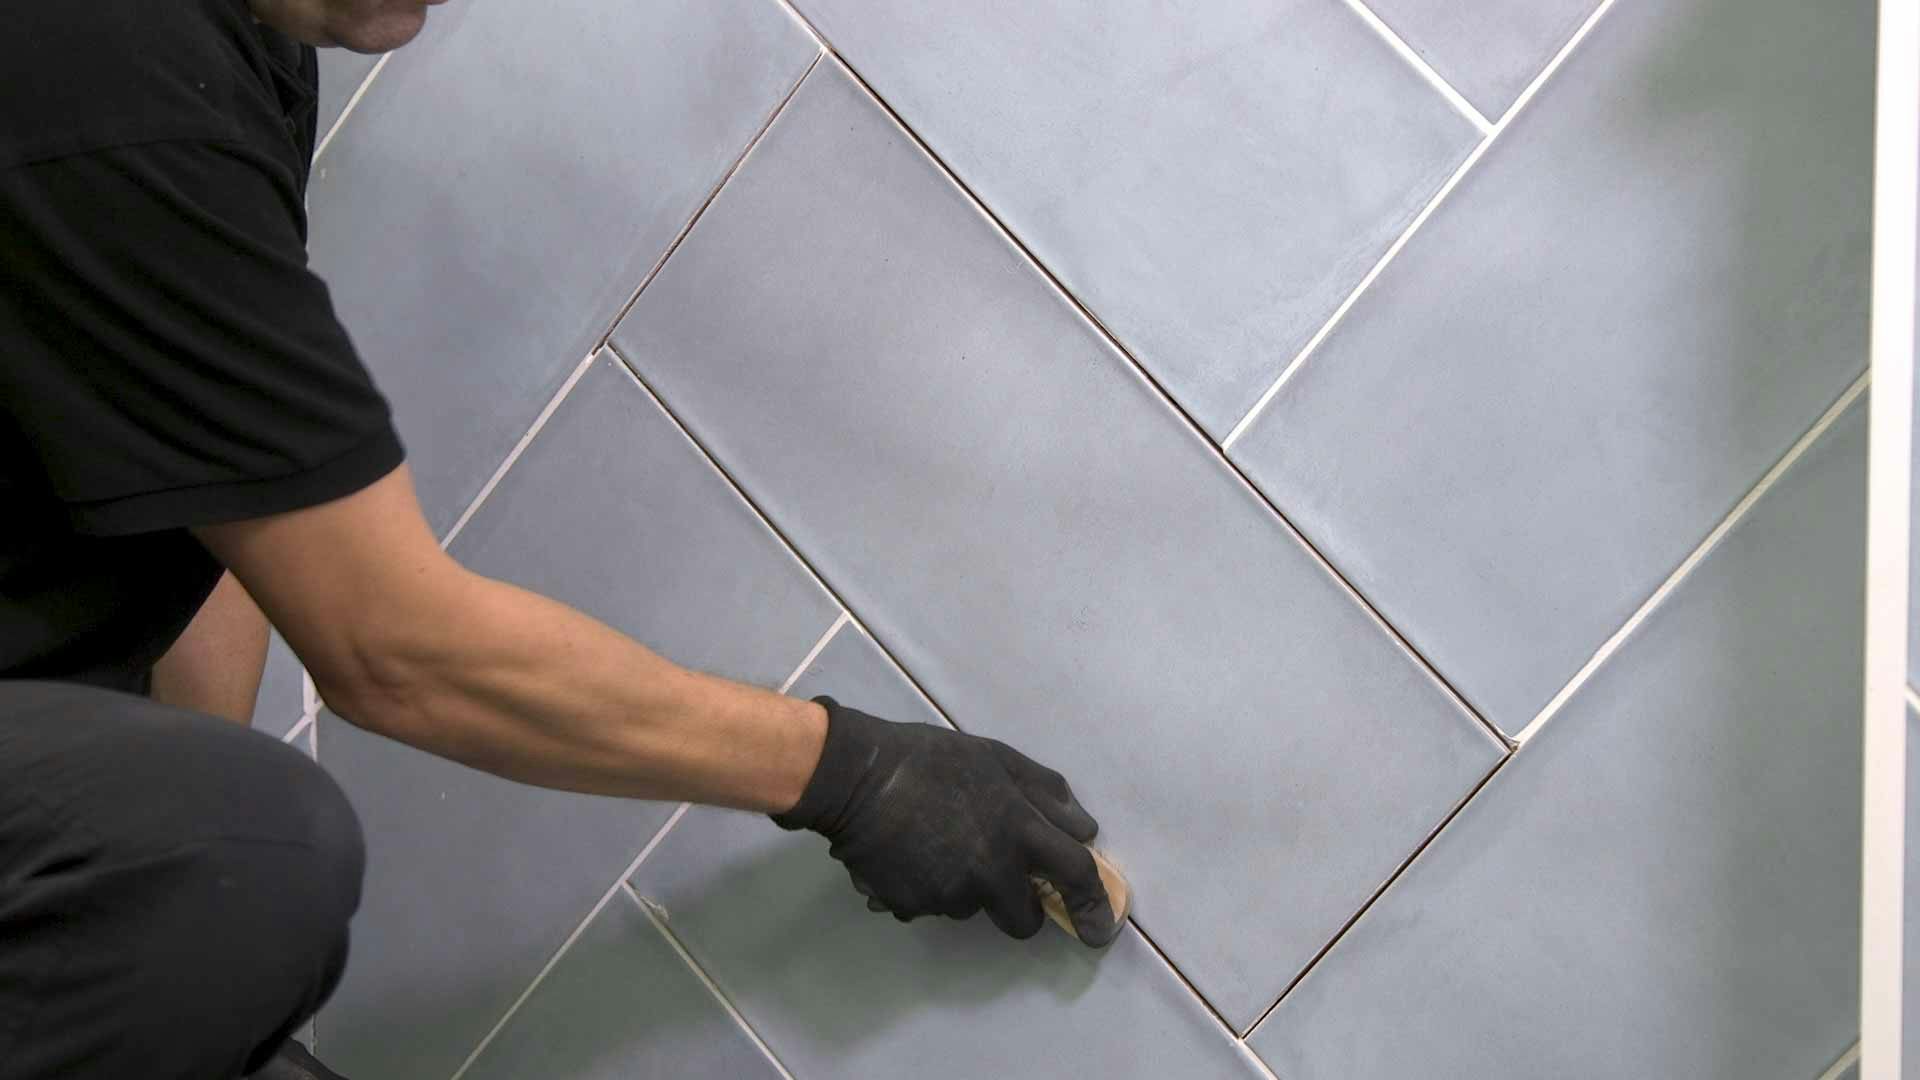 How To Remove Old Grout From Kitchen Or, Best Way To Remove Old Grout From Floor Tiles